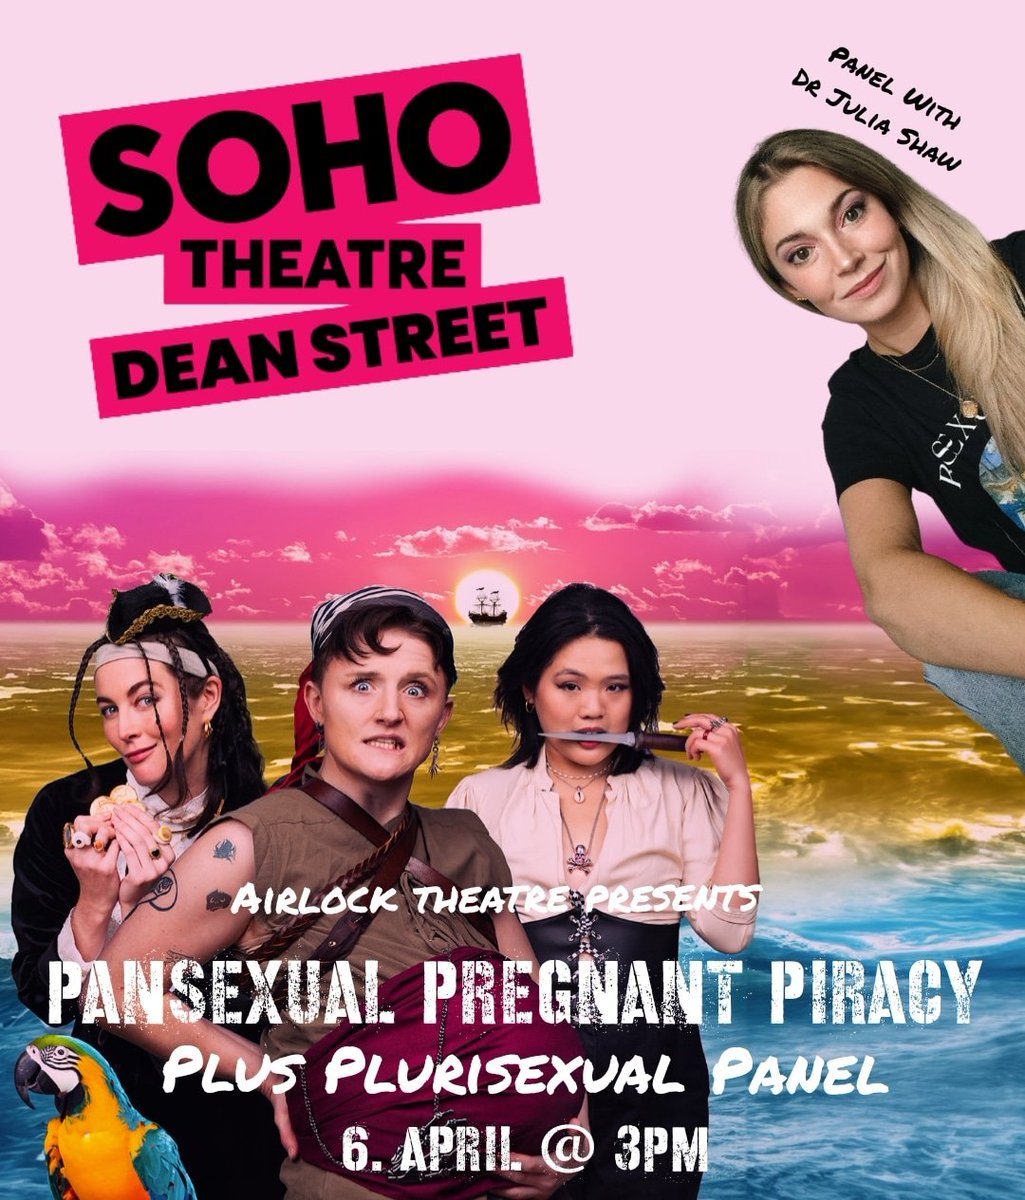 Today at 3! Come watch the play and then I'll be leading a discussion about the science, history and culture of plurisexualty after! sohotheatre.com/events/pansexu…